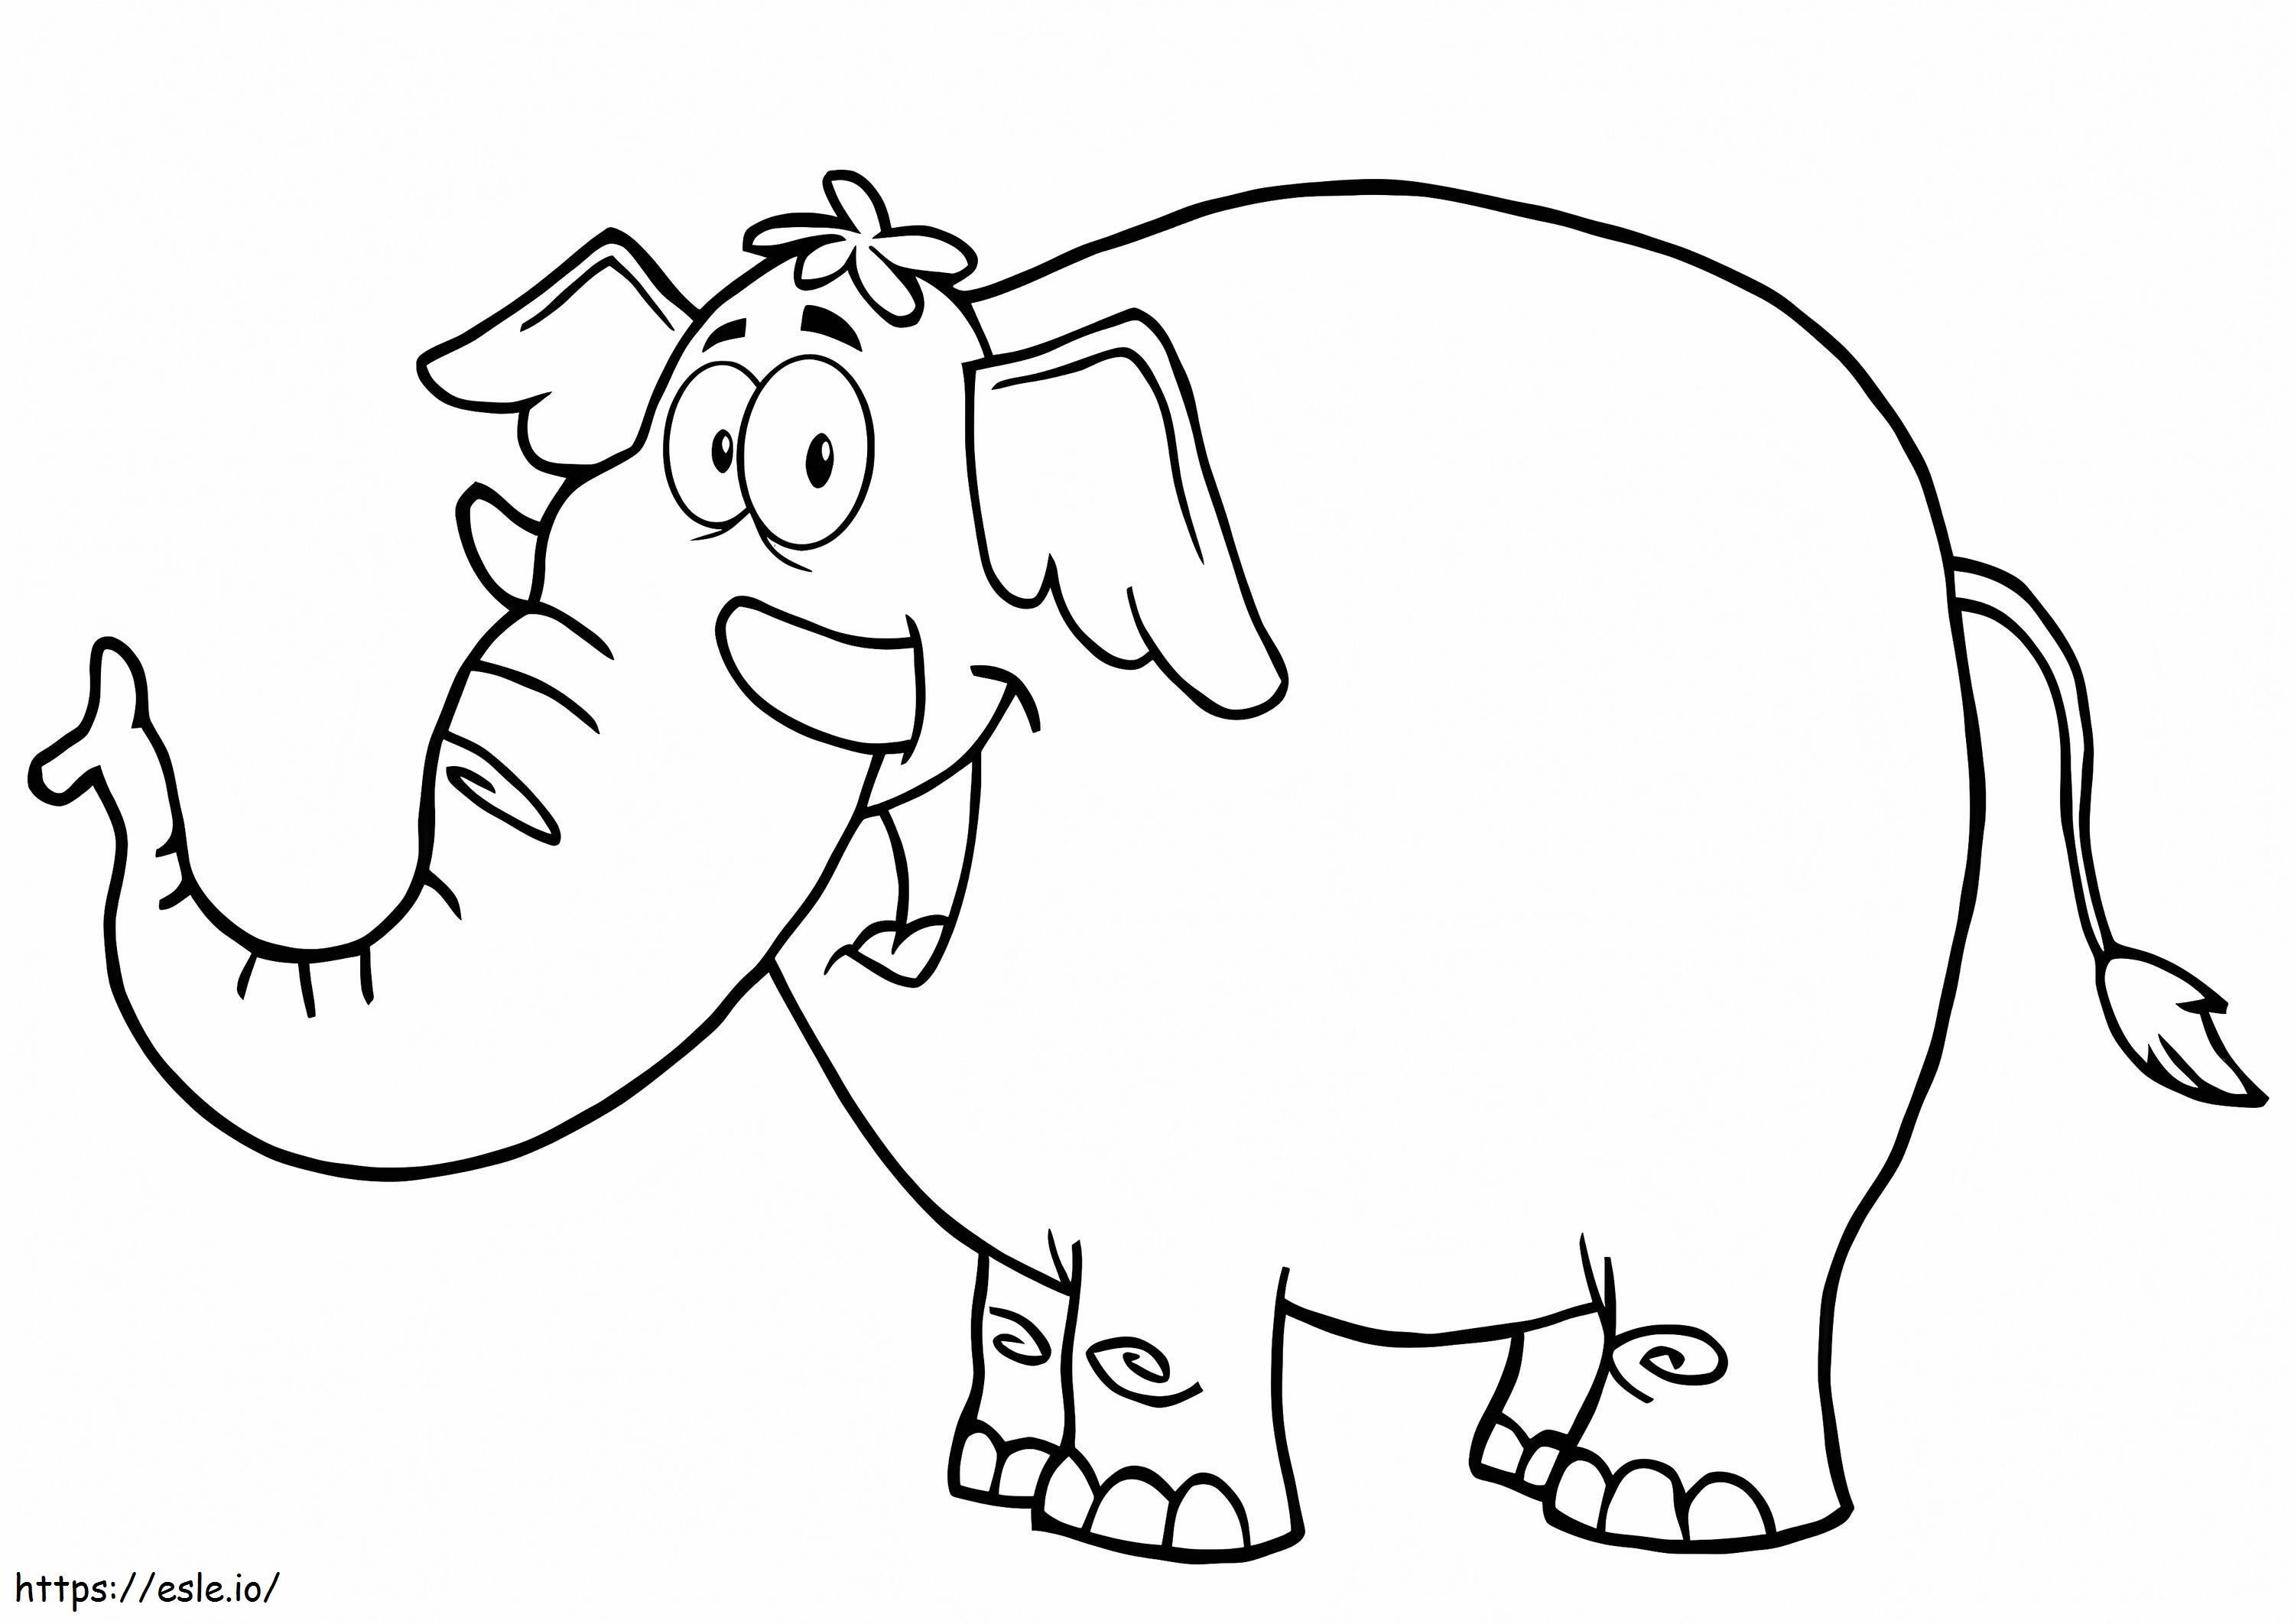 Cartoon Elephant Smiling coloring page